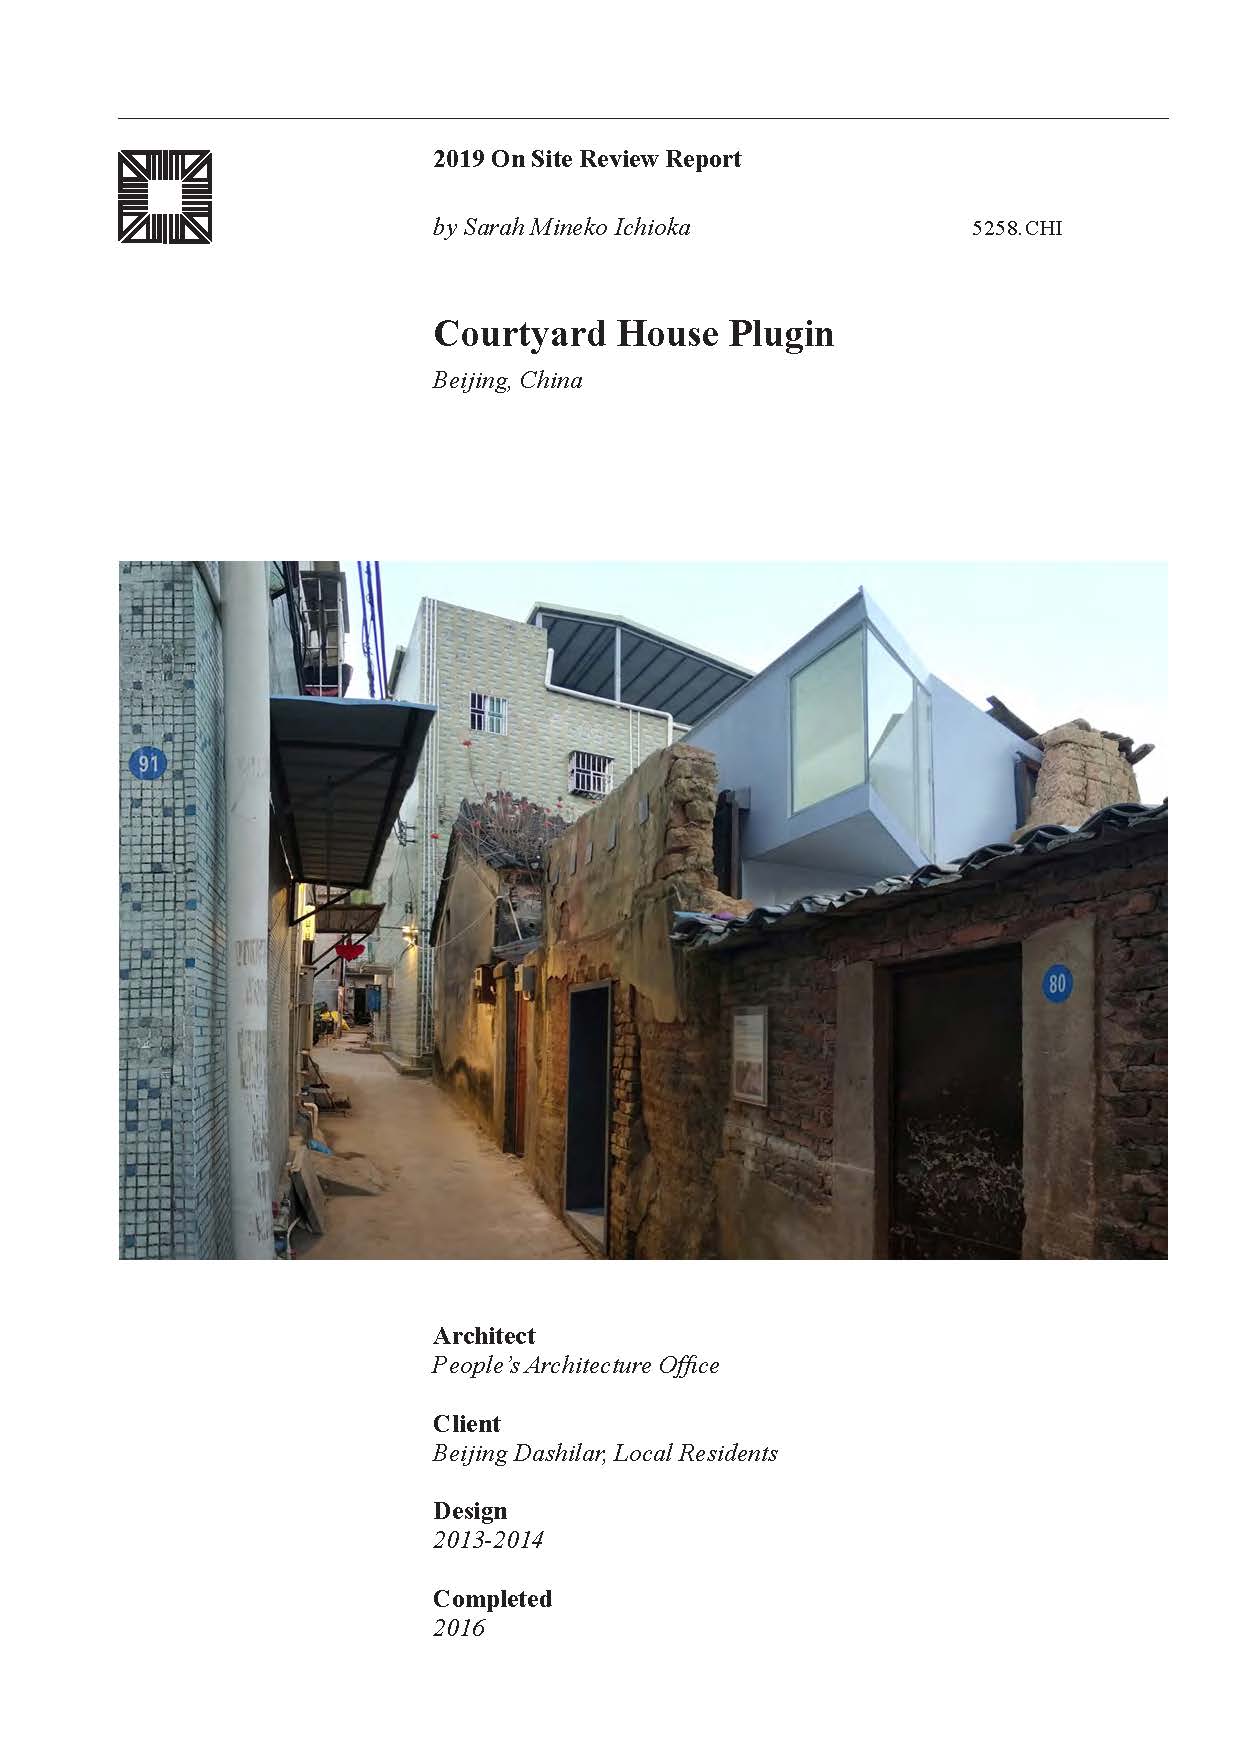 Courtyard House Plugin - The On-site Review Report, formerly called the Technical Review, is a document prepared for the Aga Khan Award for Architecture by commissioned independent reviewers who report to the Master Jury about a specific shortlisted project. The reviewers are architectural professionals specialised in various disciplines, including housing, urban planning, landscape design, and restoration. Their task is to examine, on-site, the shortlisted projects to verify project data seek. The reviewers must consider a detailed set of criteria in their written reports, and must also respond to the specific concerns and questions prepared by the Master Jury for each project. This process is intensive and exhaustive making the Aga Khan Award process entirely unique.